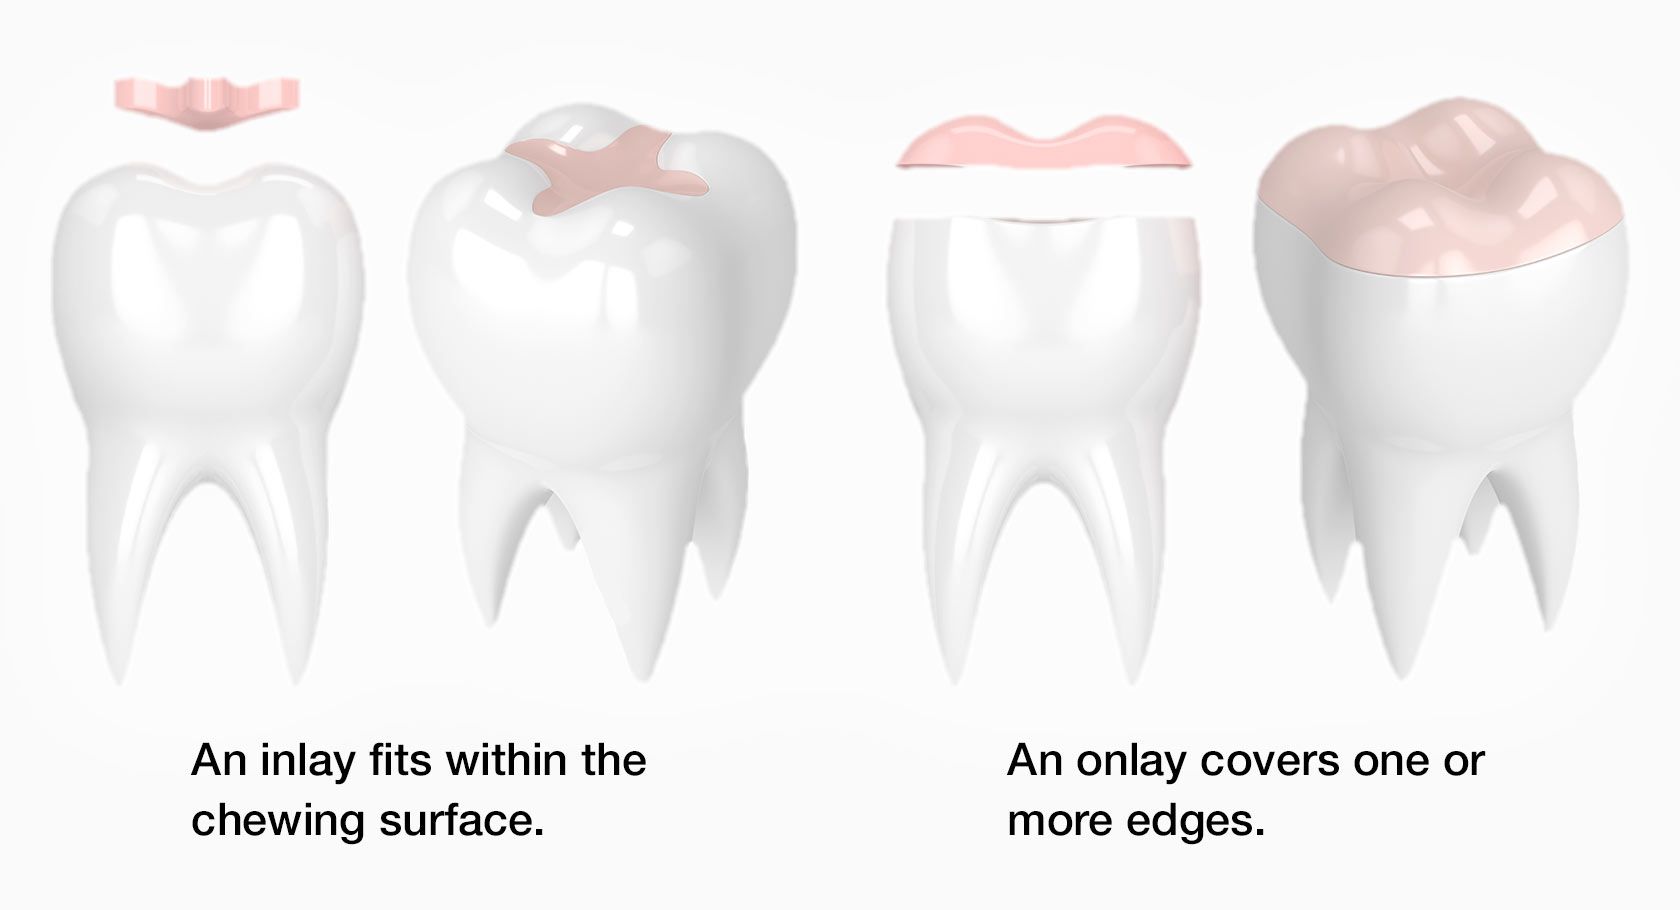 A Guide to Onlays and Inlays - Dental Guide